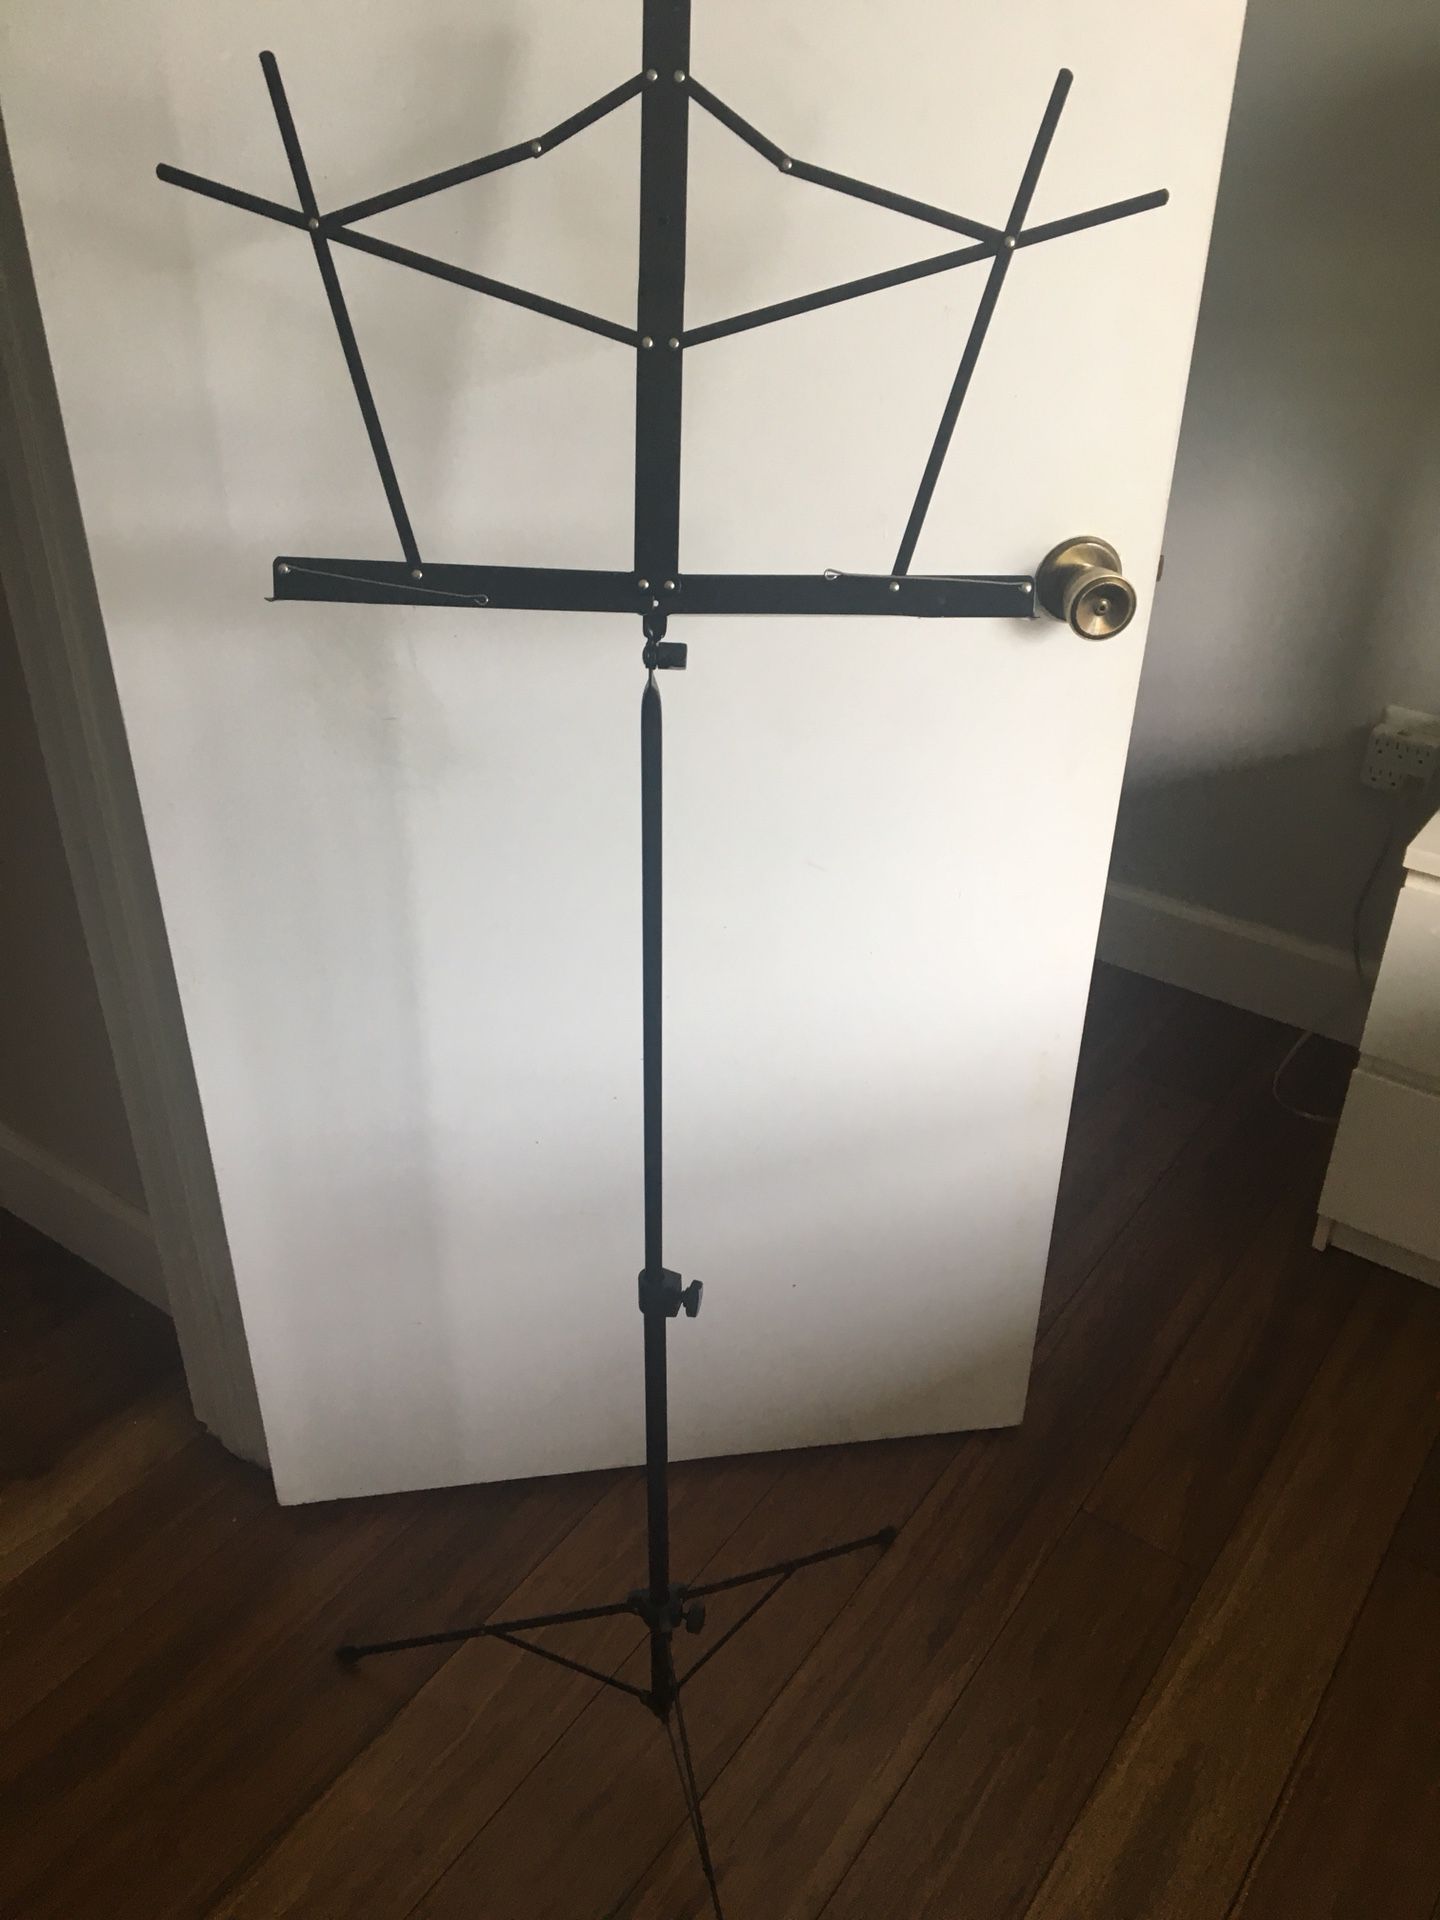 Music sheet stand for instruments